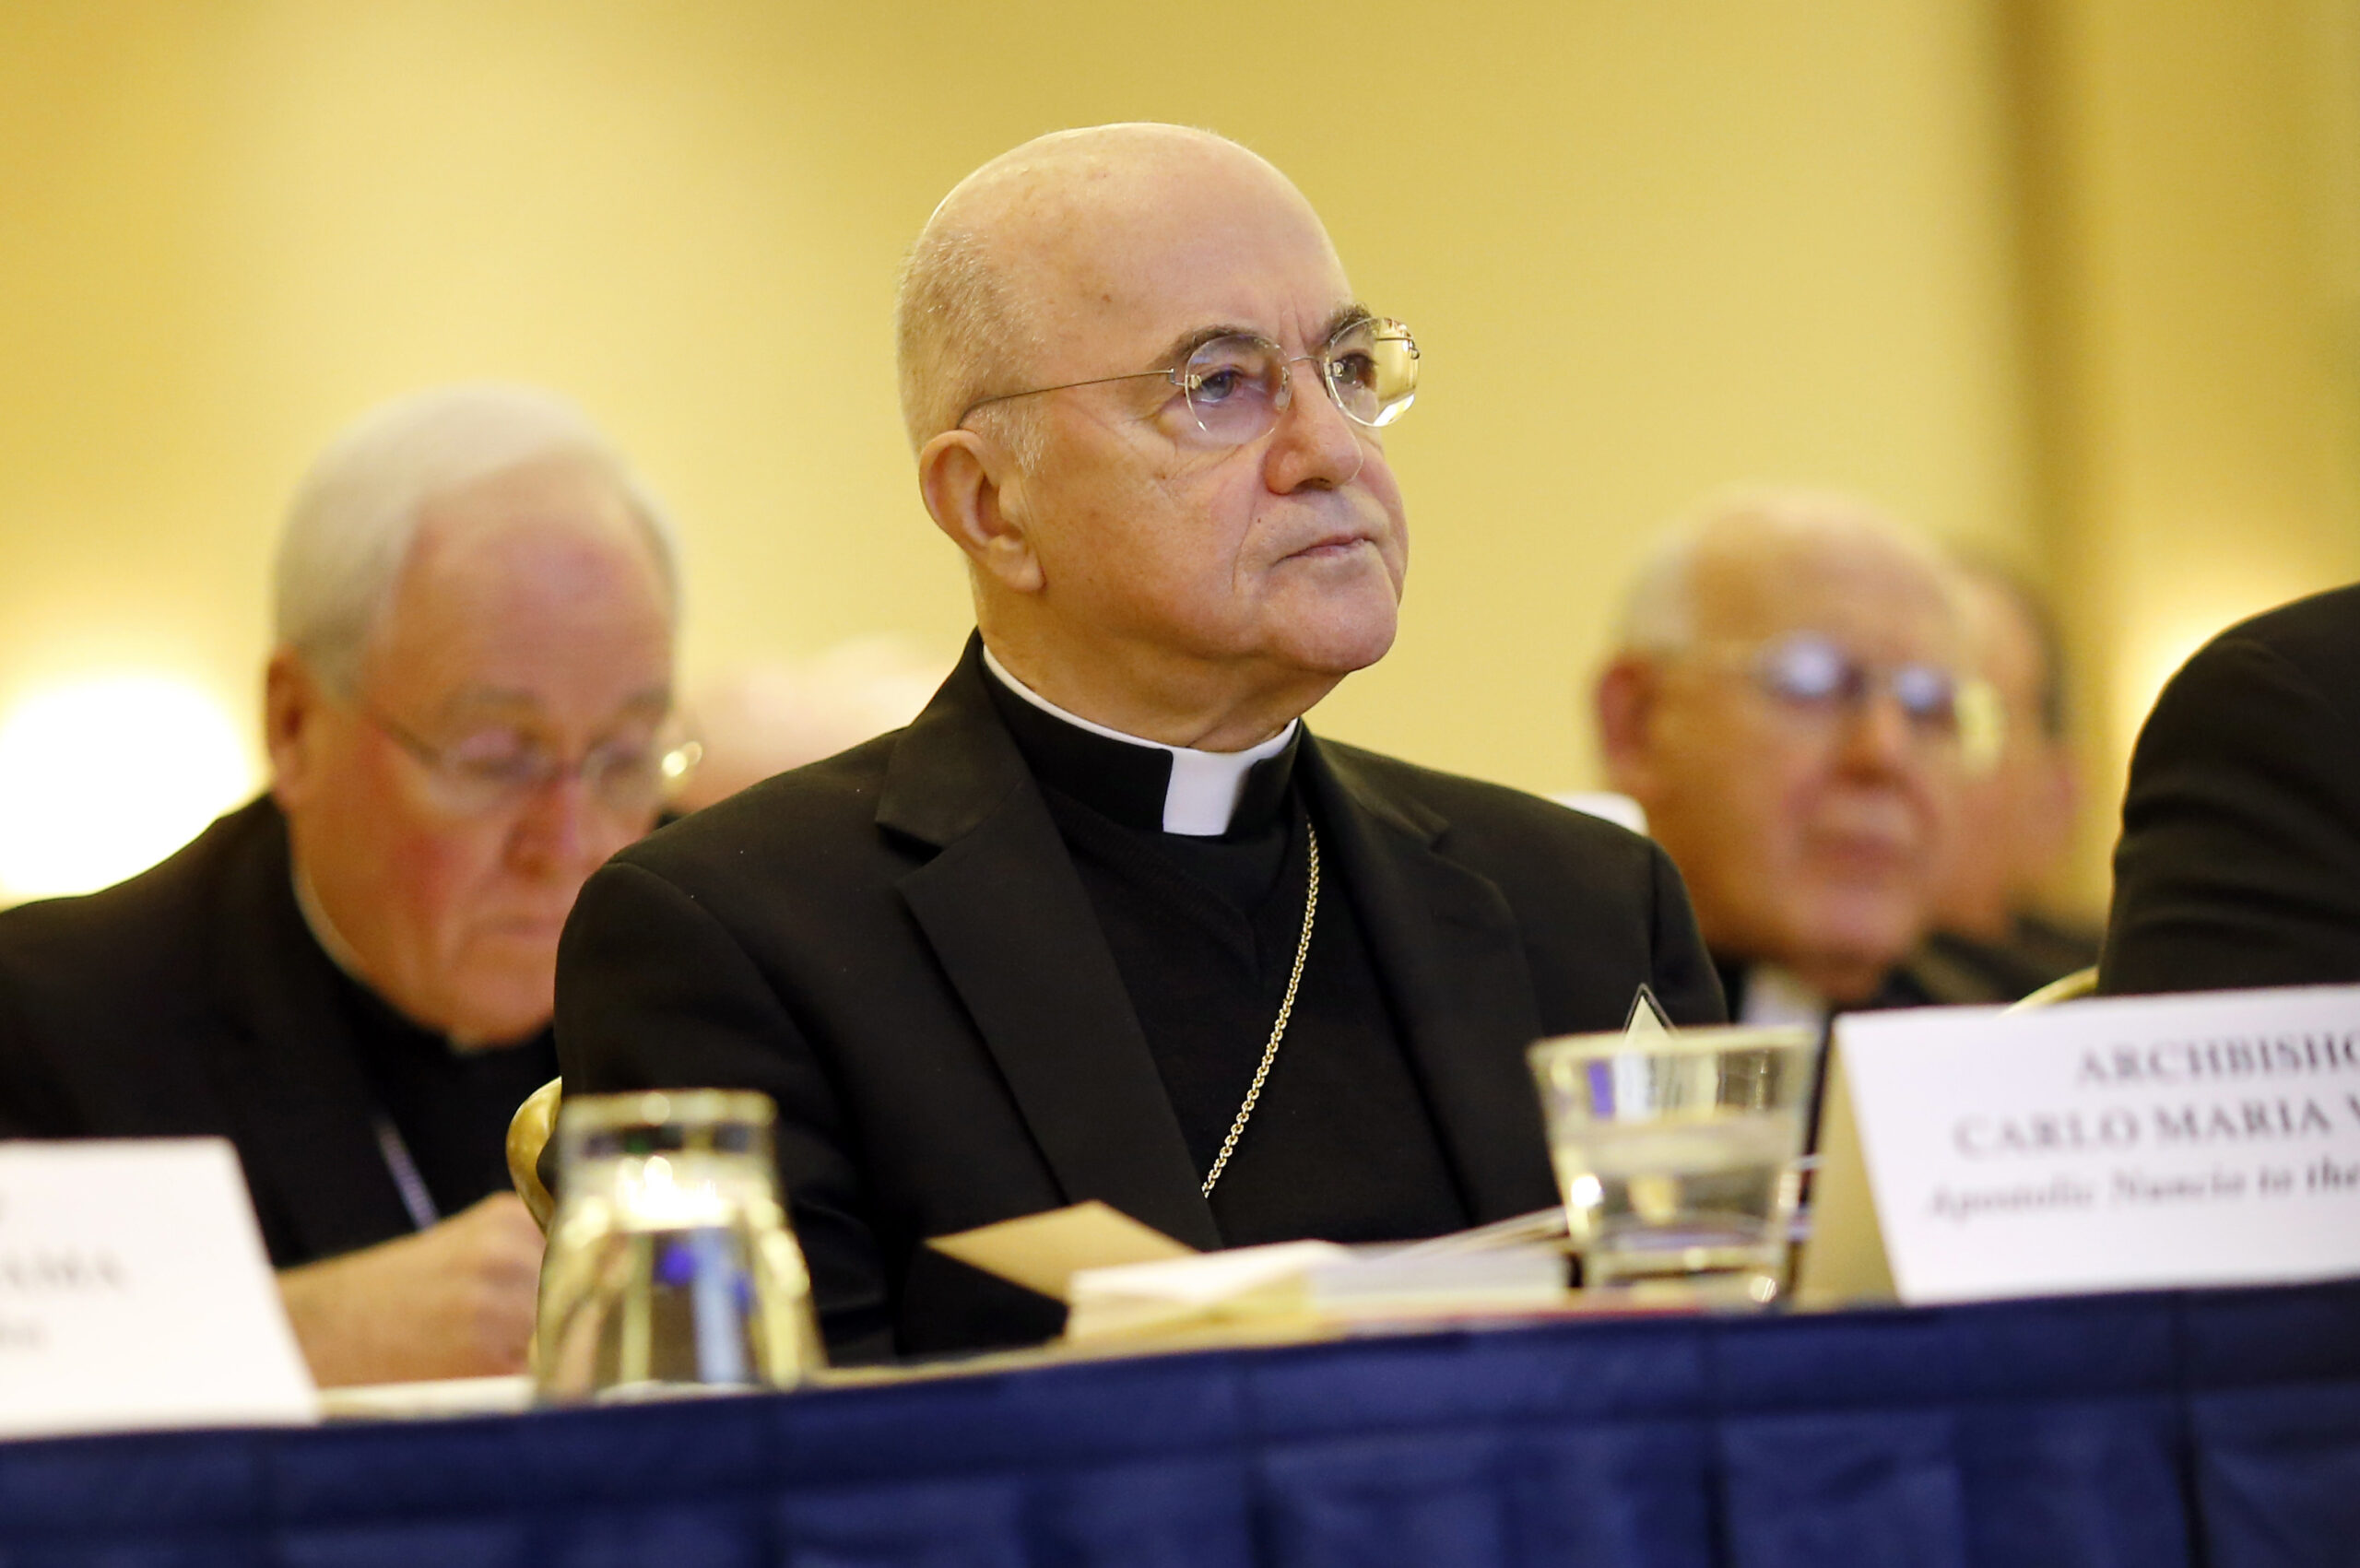 Former nuncio to US says he faces schism charges from Vatican